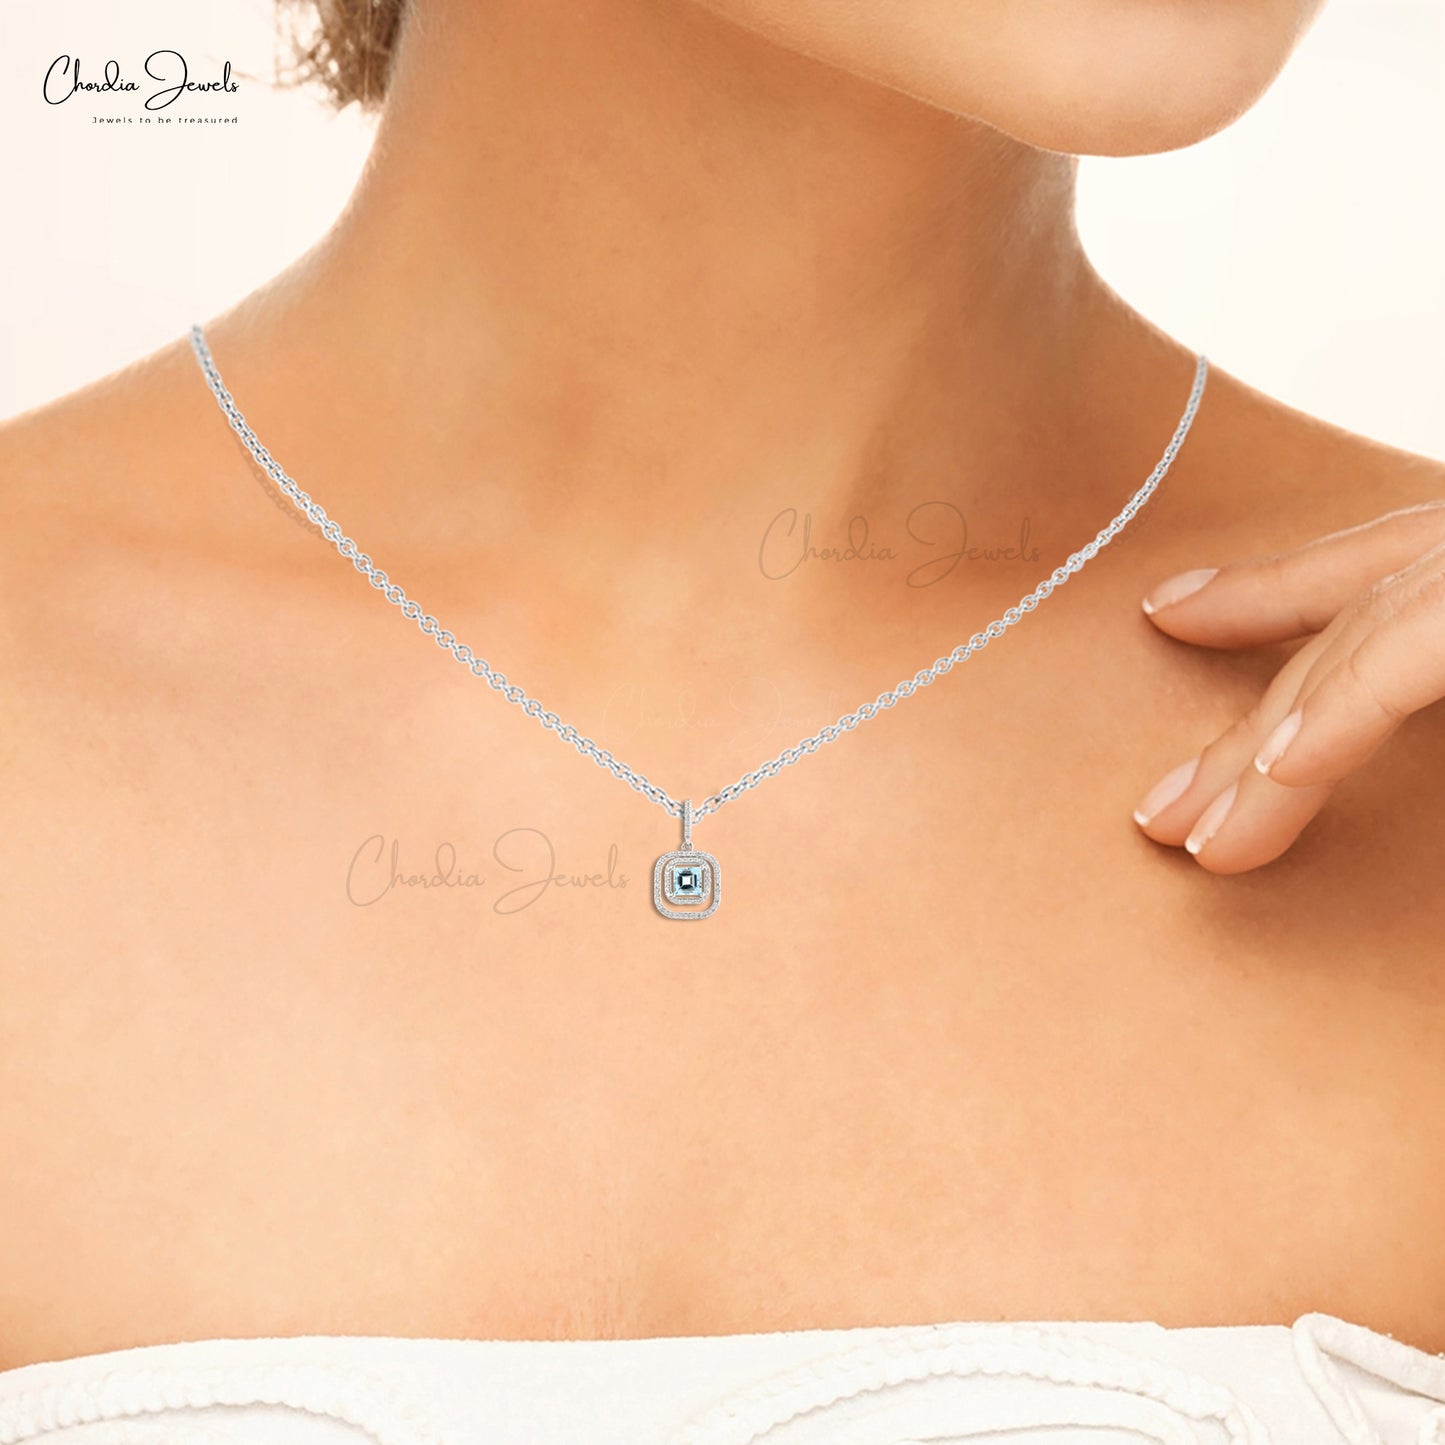 Minimalist Authentic Aquamarine and White Diamond Accented Double Halo Collier Necklace Pendant Solid 14k White Gold Jewelry Wedding Gift